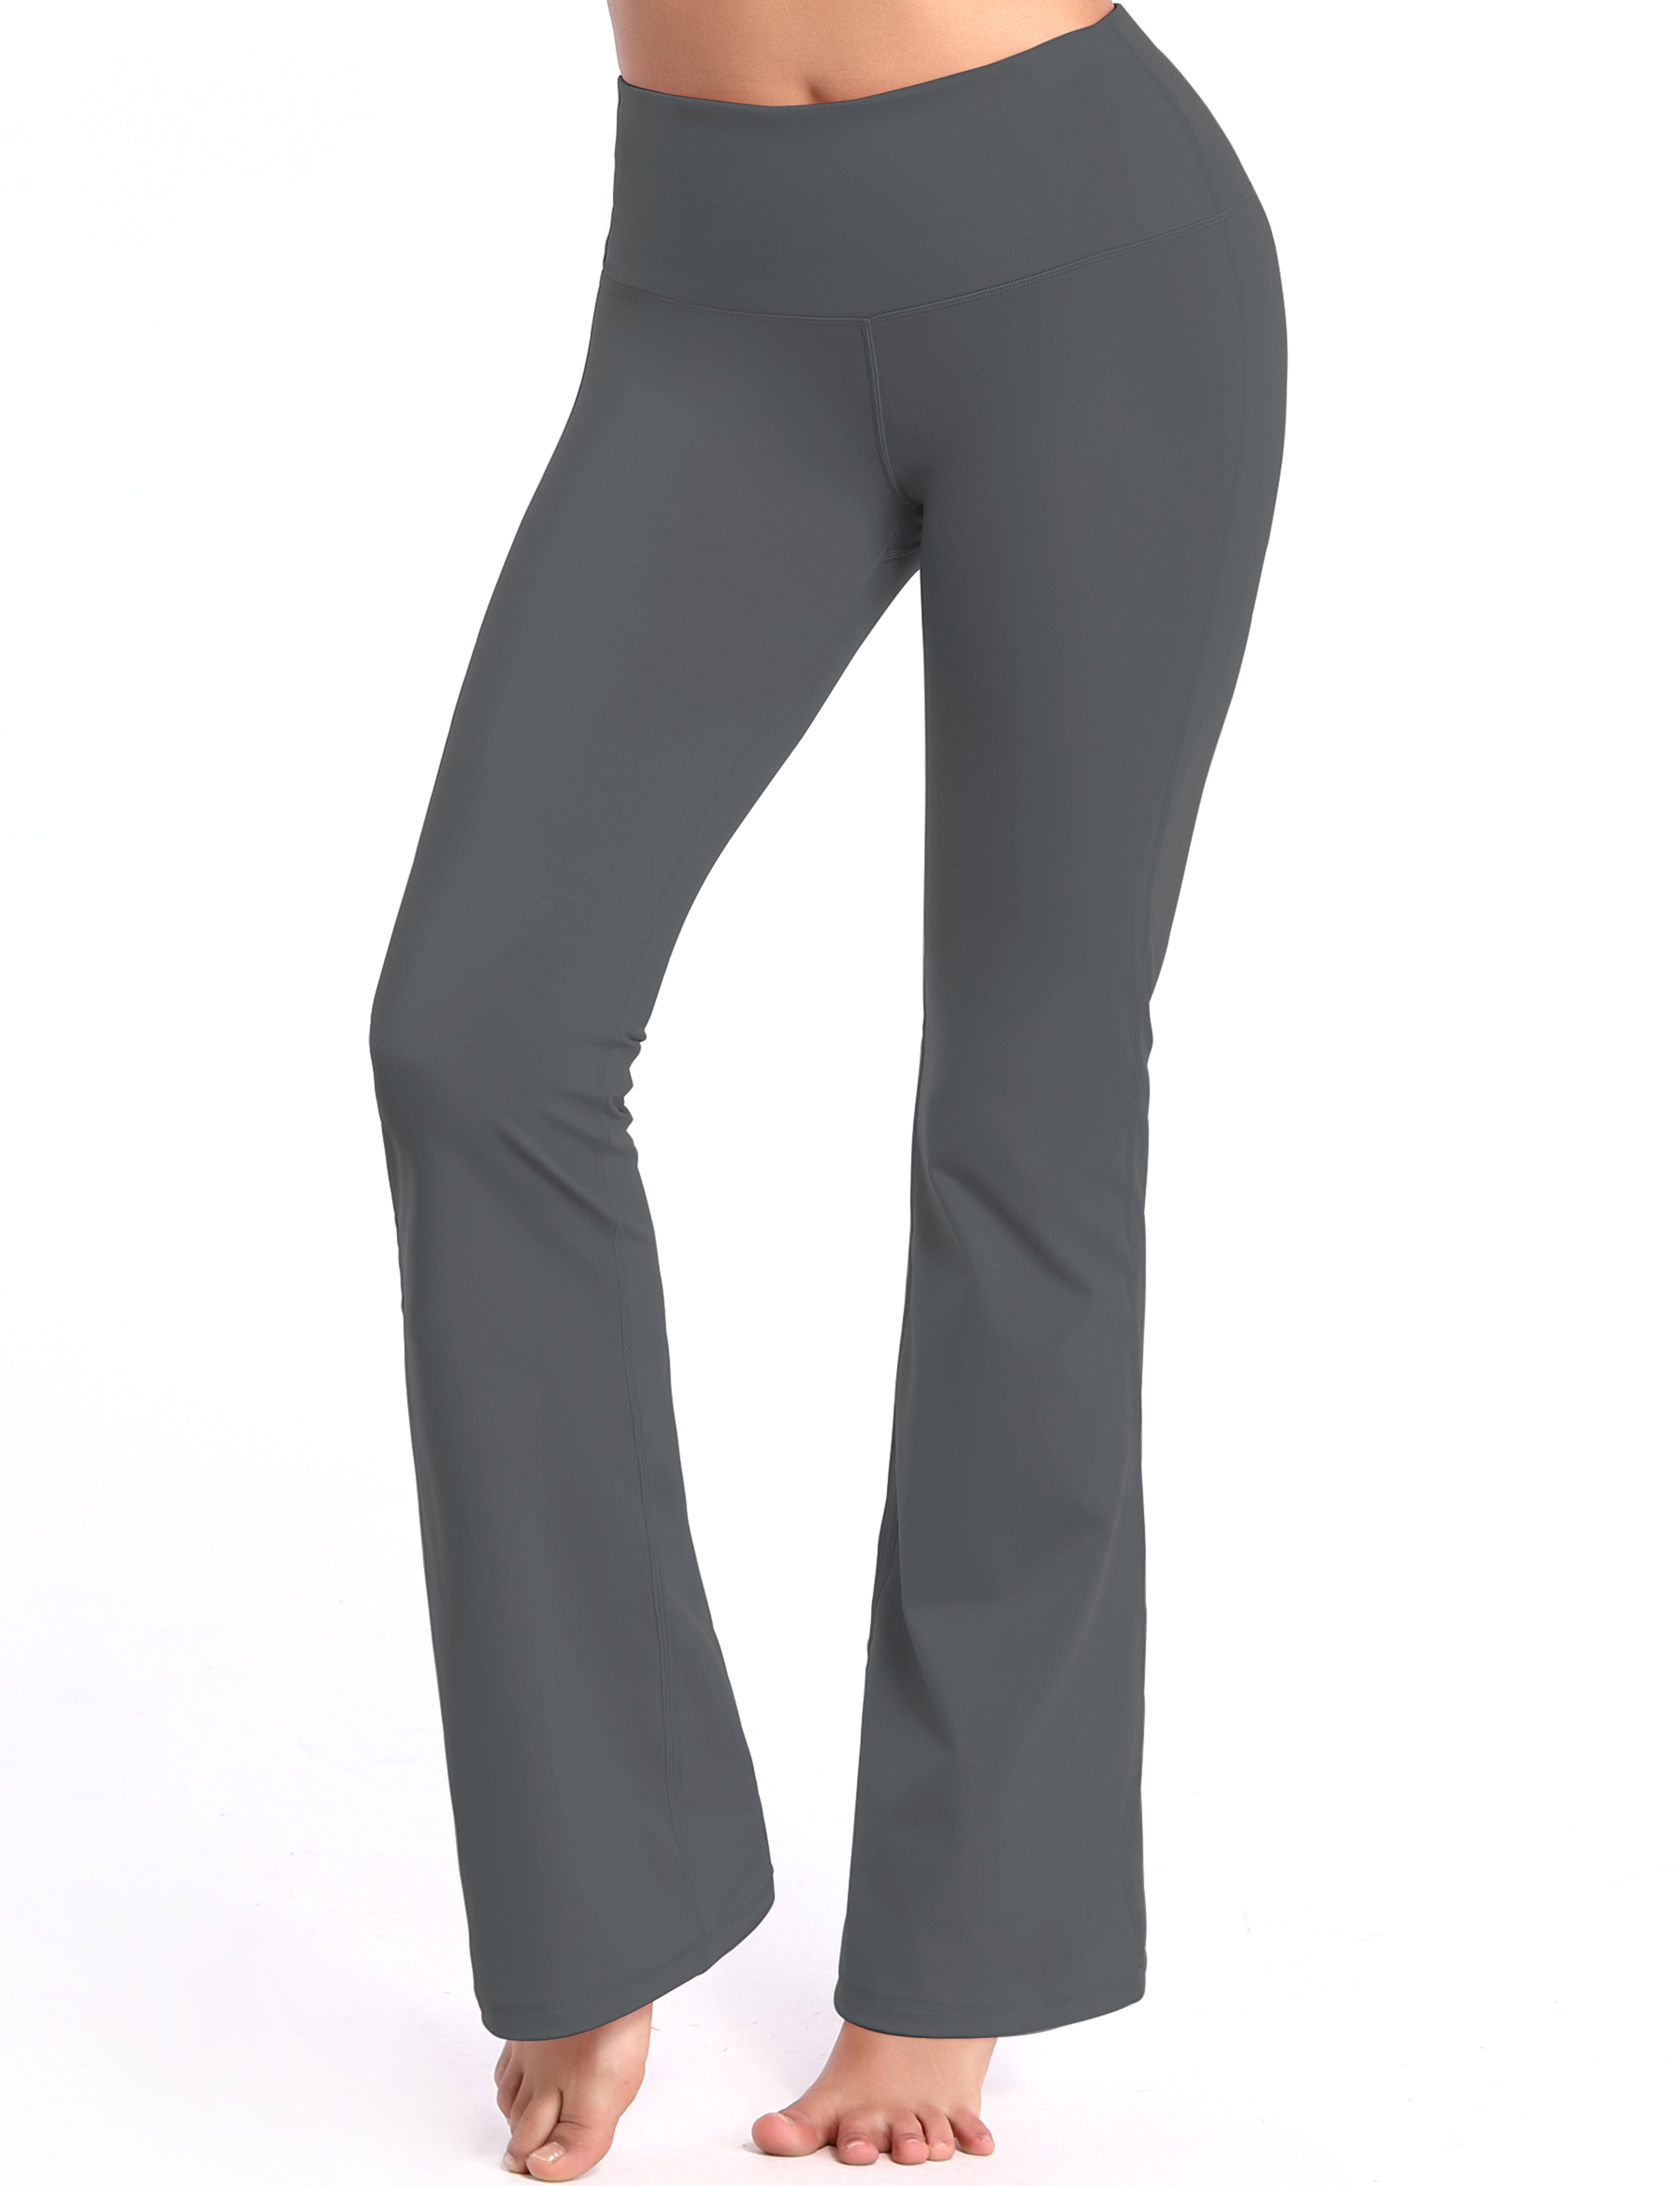 High Waist Bootcut Leggings Shadowcharcoal 75%Nylon/25%Spandex Fabric doesn't attract lint easily 4-way stretch No see-through Moisture-wicking Tummy control Inner pocket Five lengths